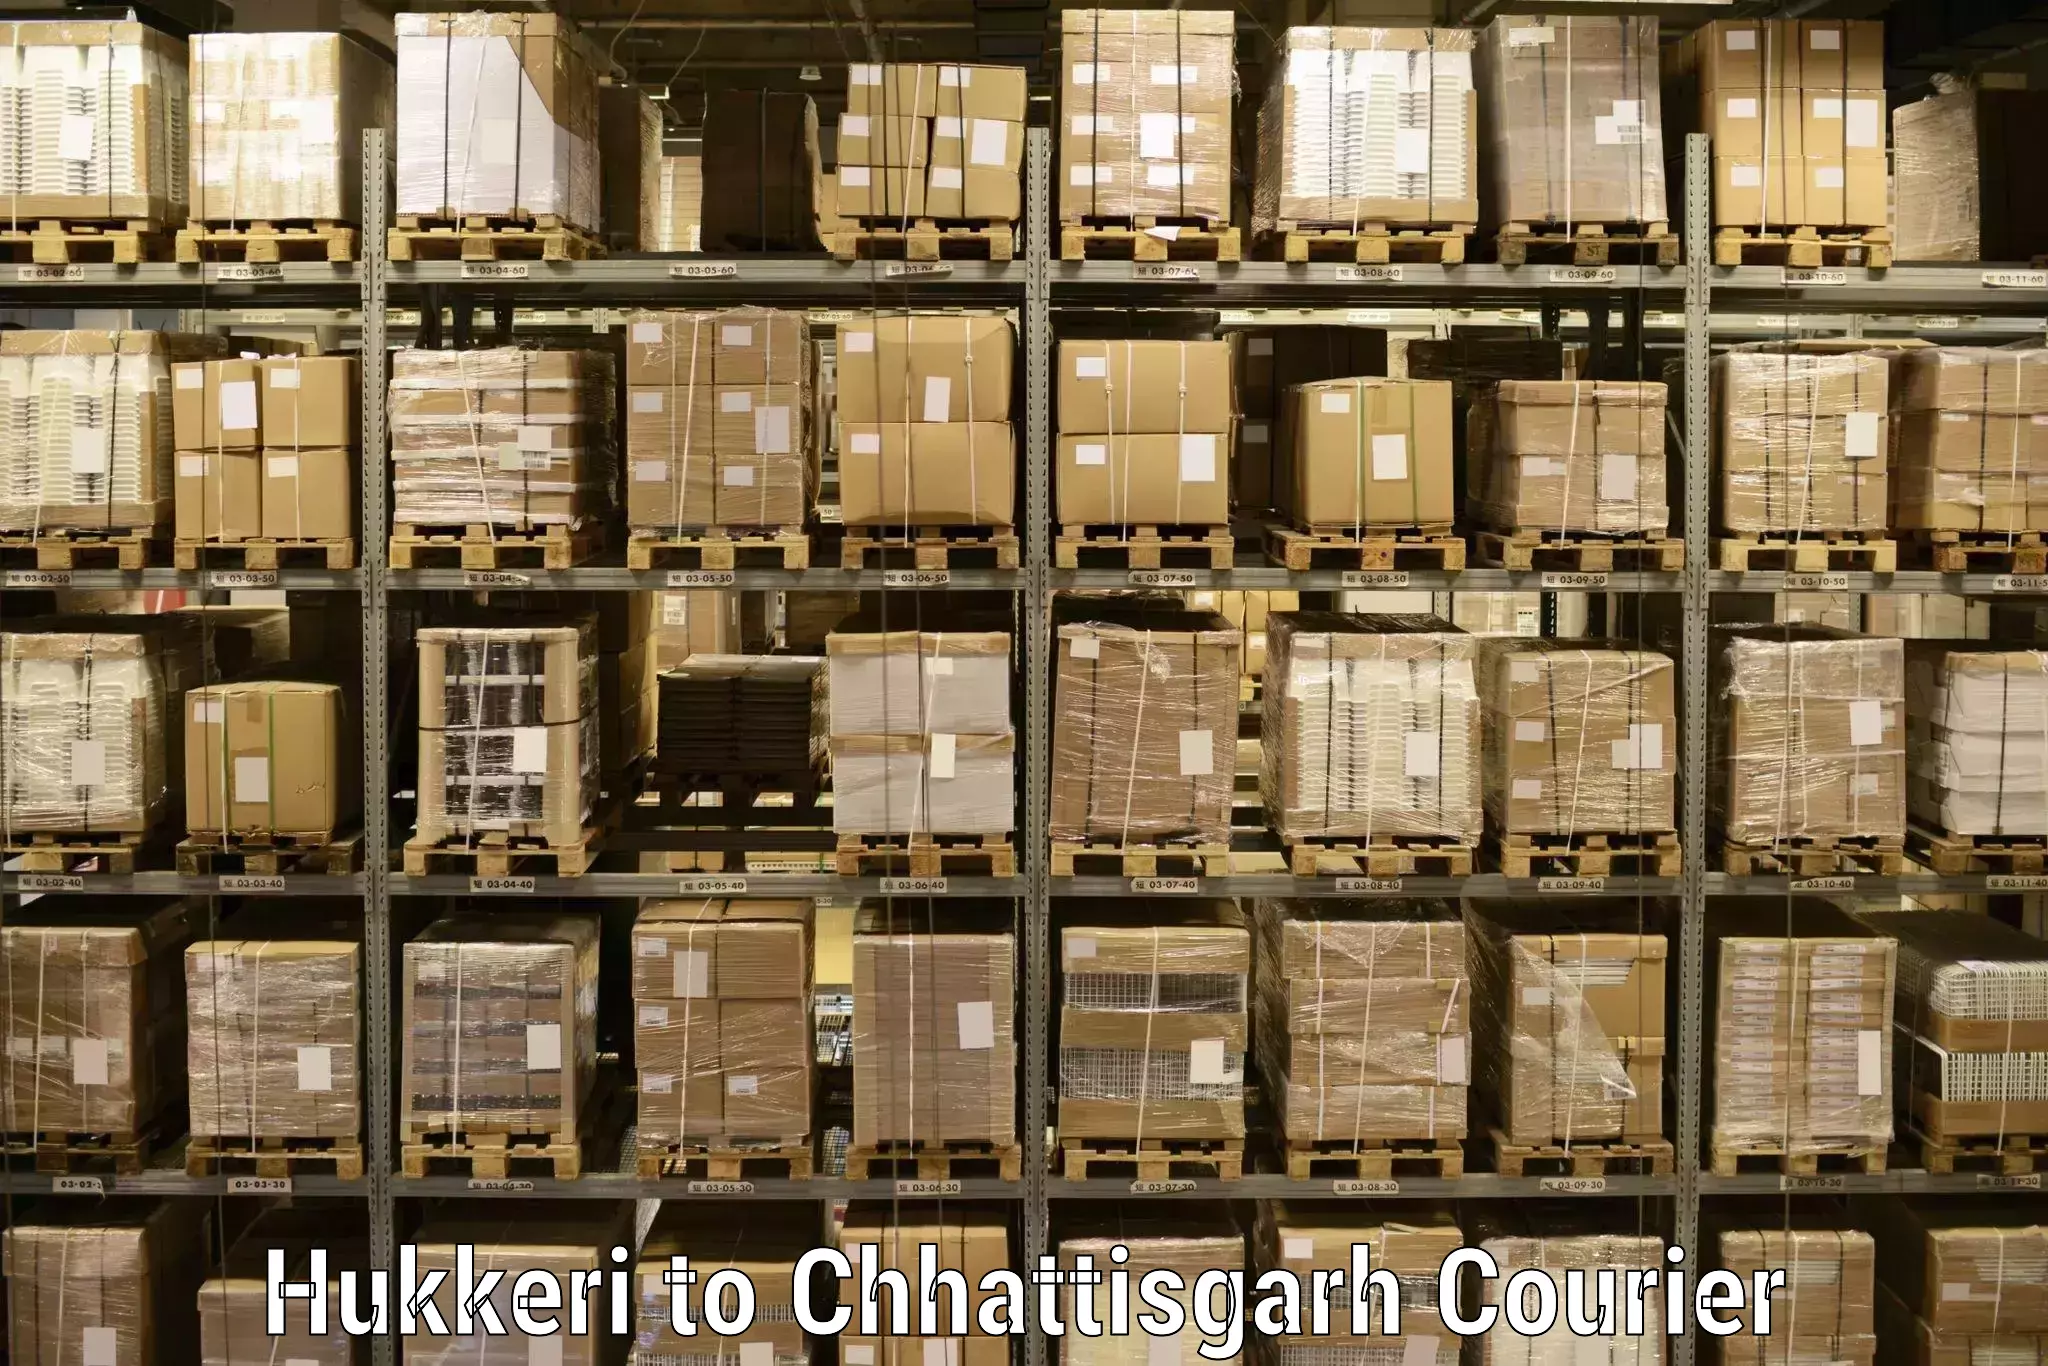 Courier service efficiency in Hukkeri to Bastar